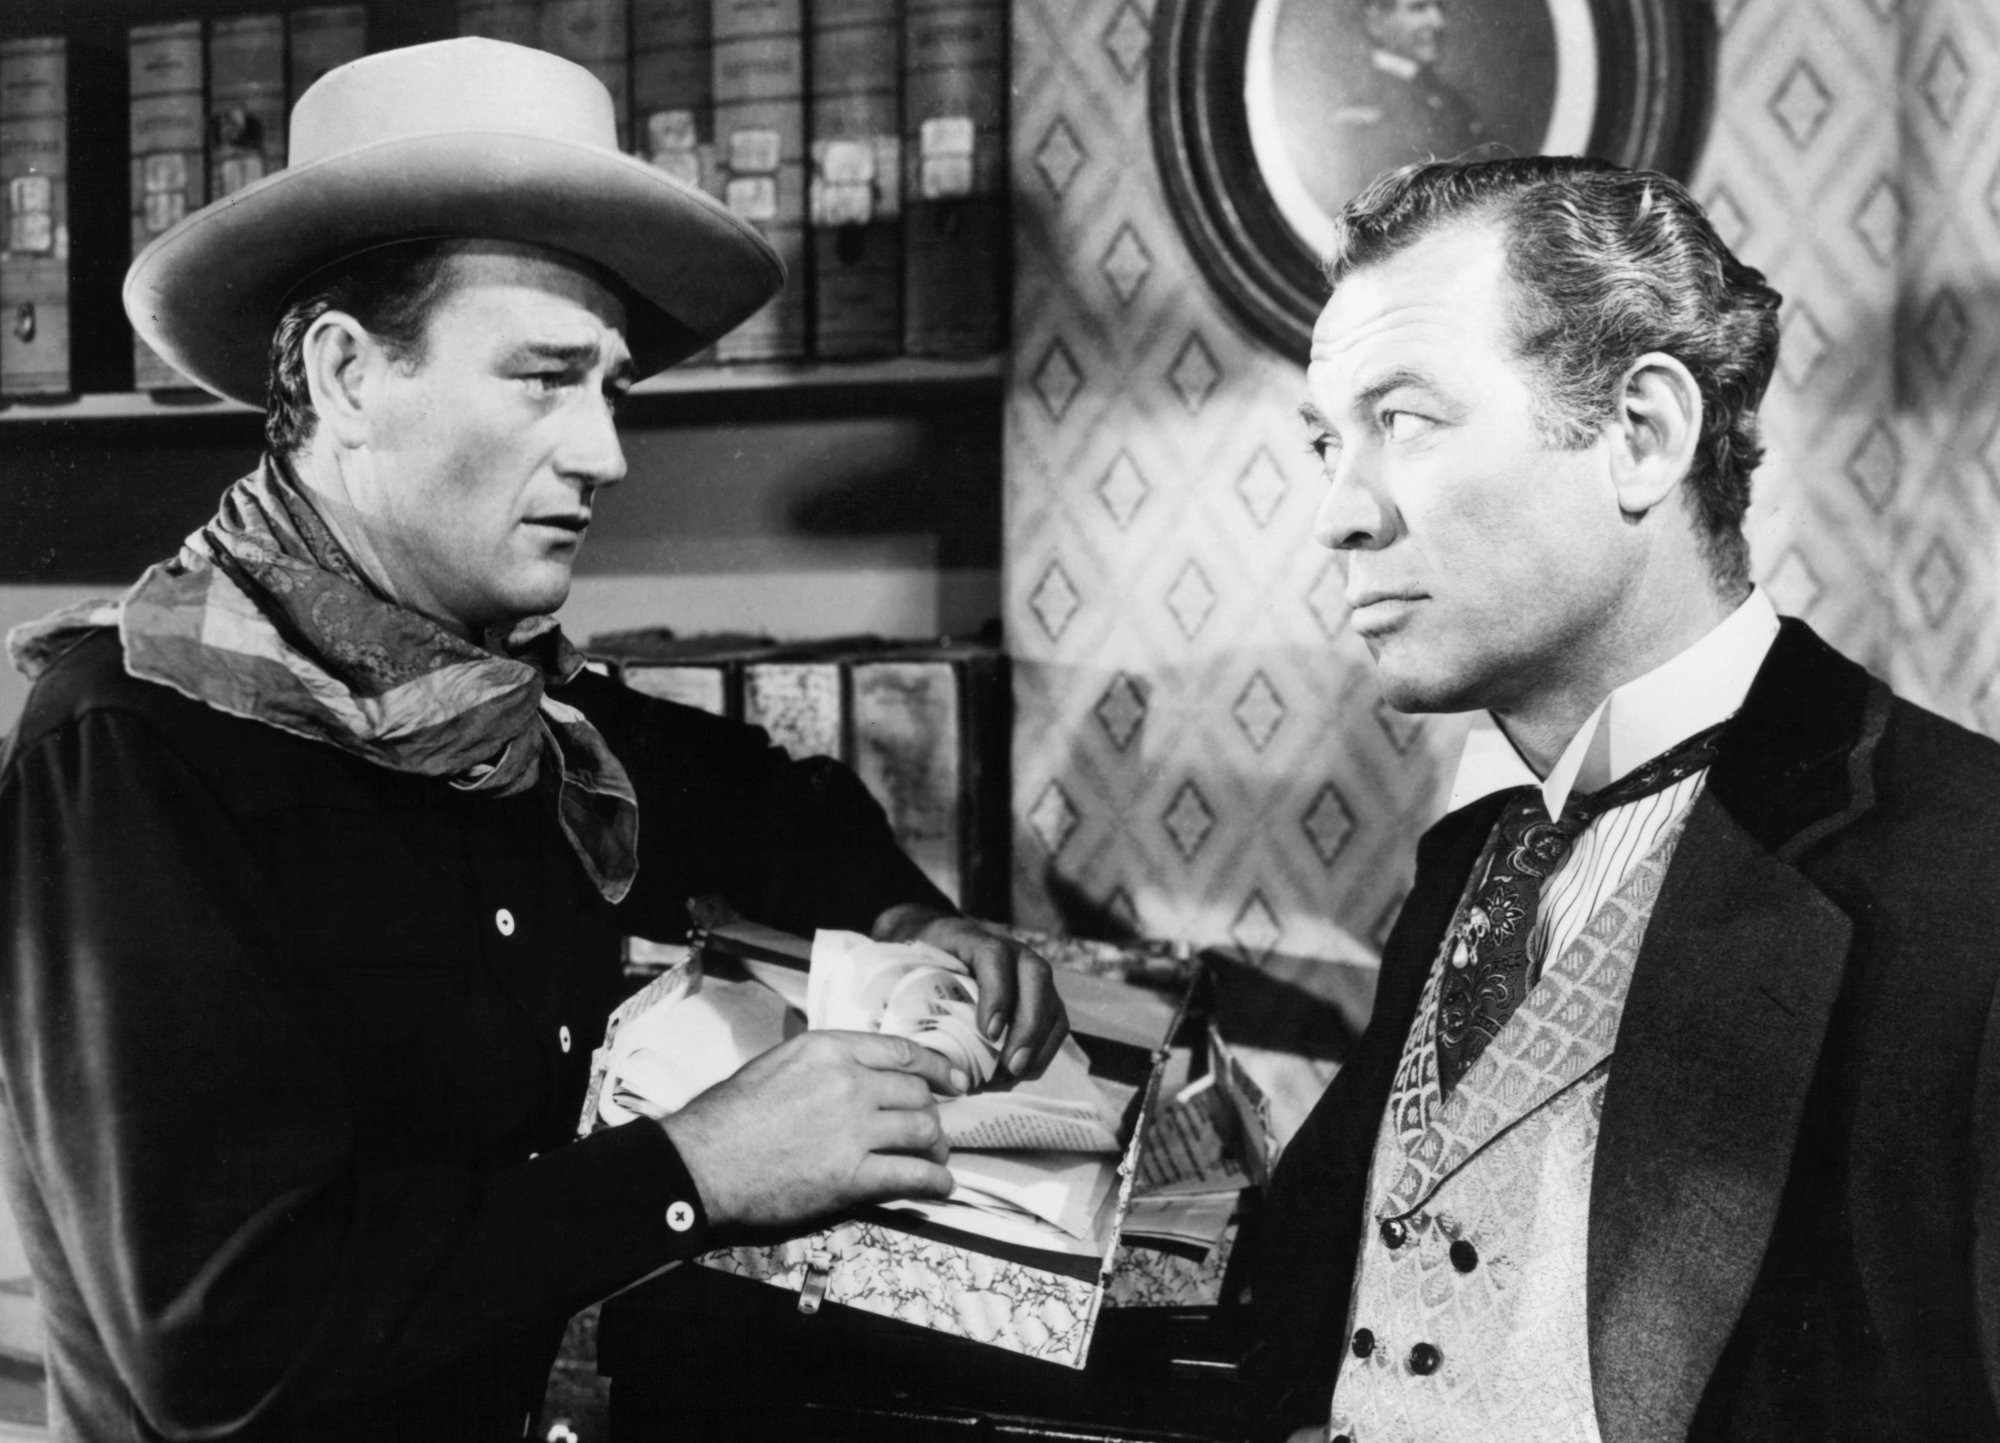 'Tall in the Saddle' John Wayne and Ward Bond. They're looking at each other in the eyes wearing Western costumes in front of a bookcase